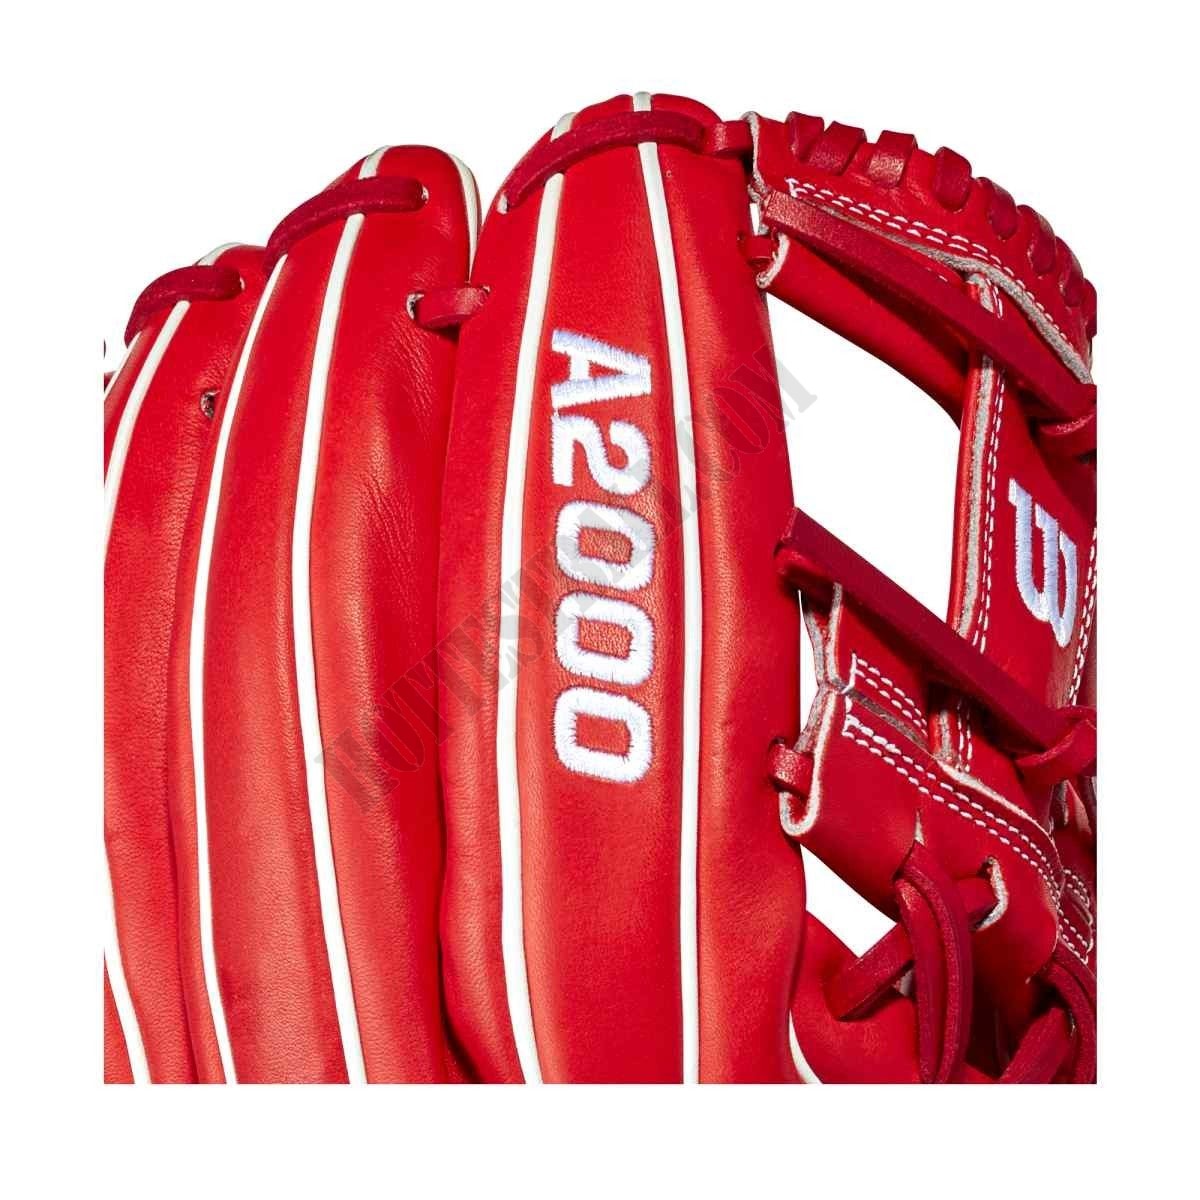 2021 A2000 1786 Canada 11.5" Infield Baseball Glove - Limited Edition ● Wilson Promotions - -6